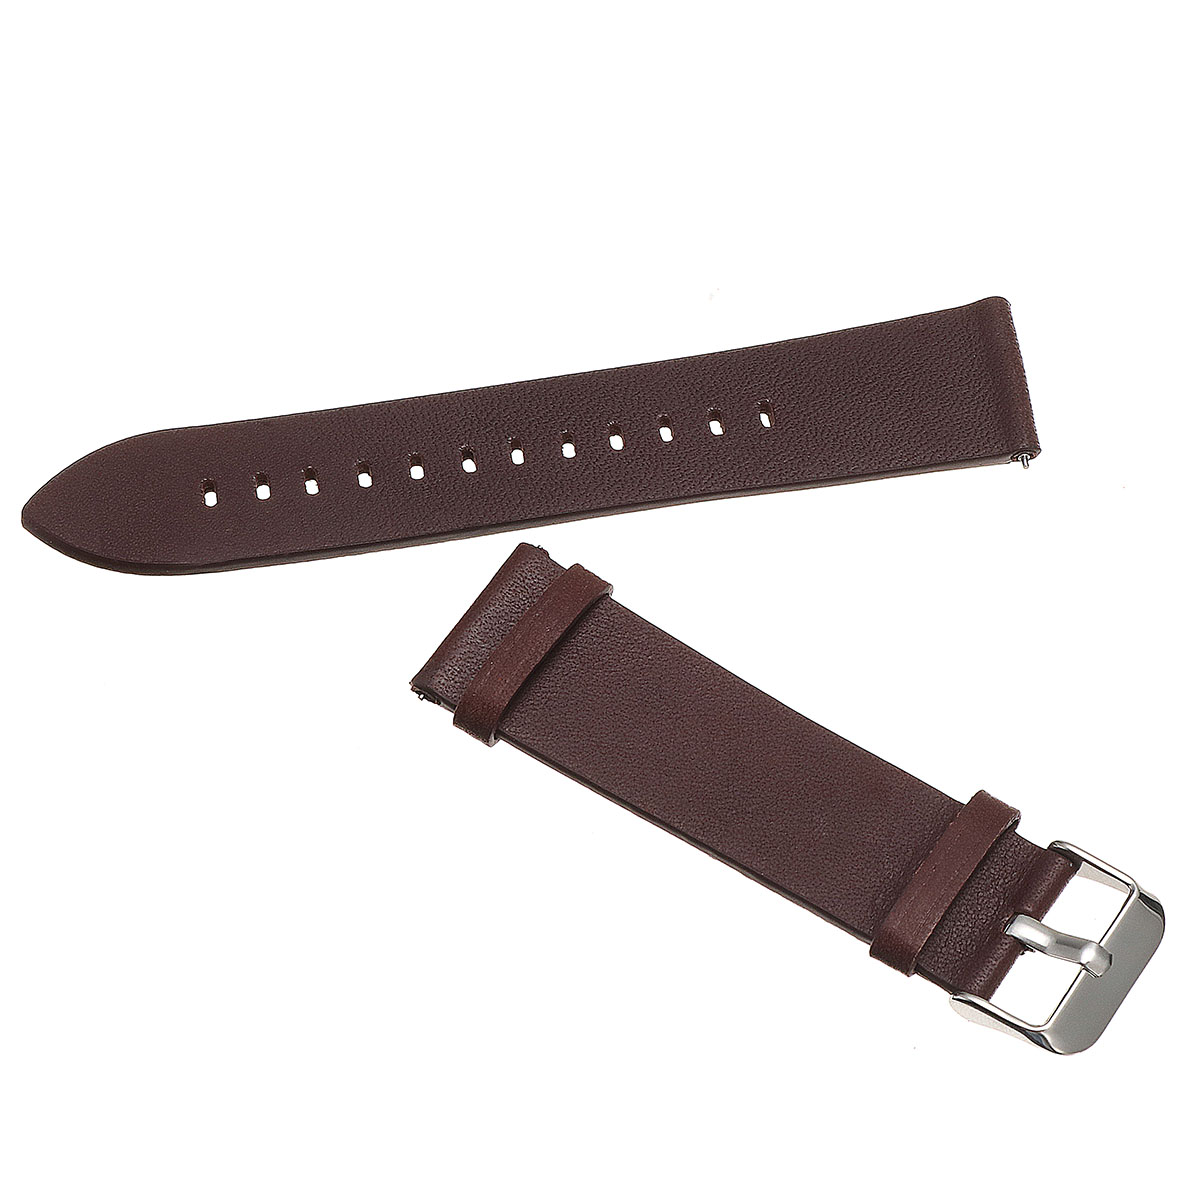 22mm-Leather-Watch-Band-Strap-for-Samsung-Gear-S3-FrontierClassic-1288488